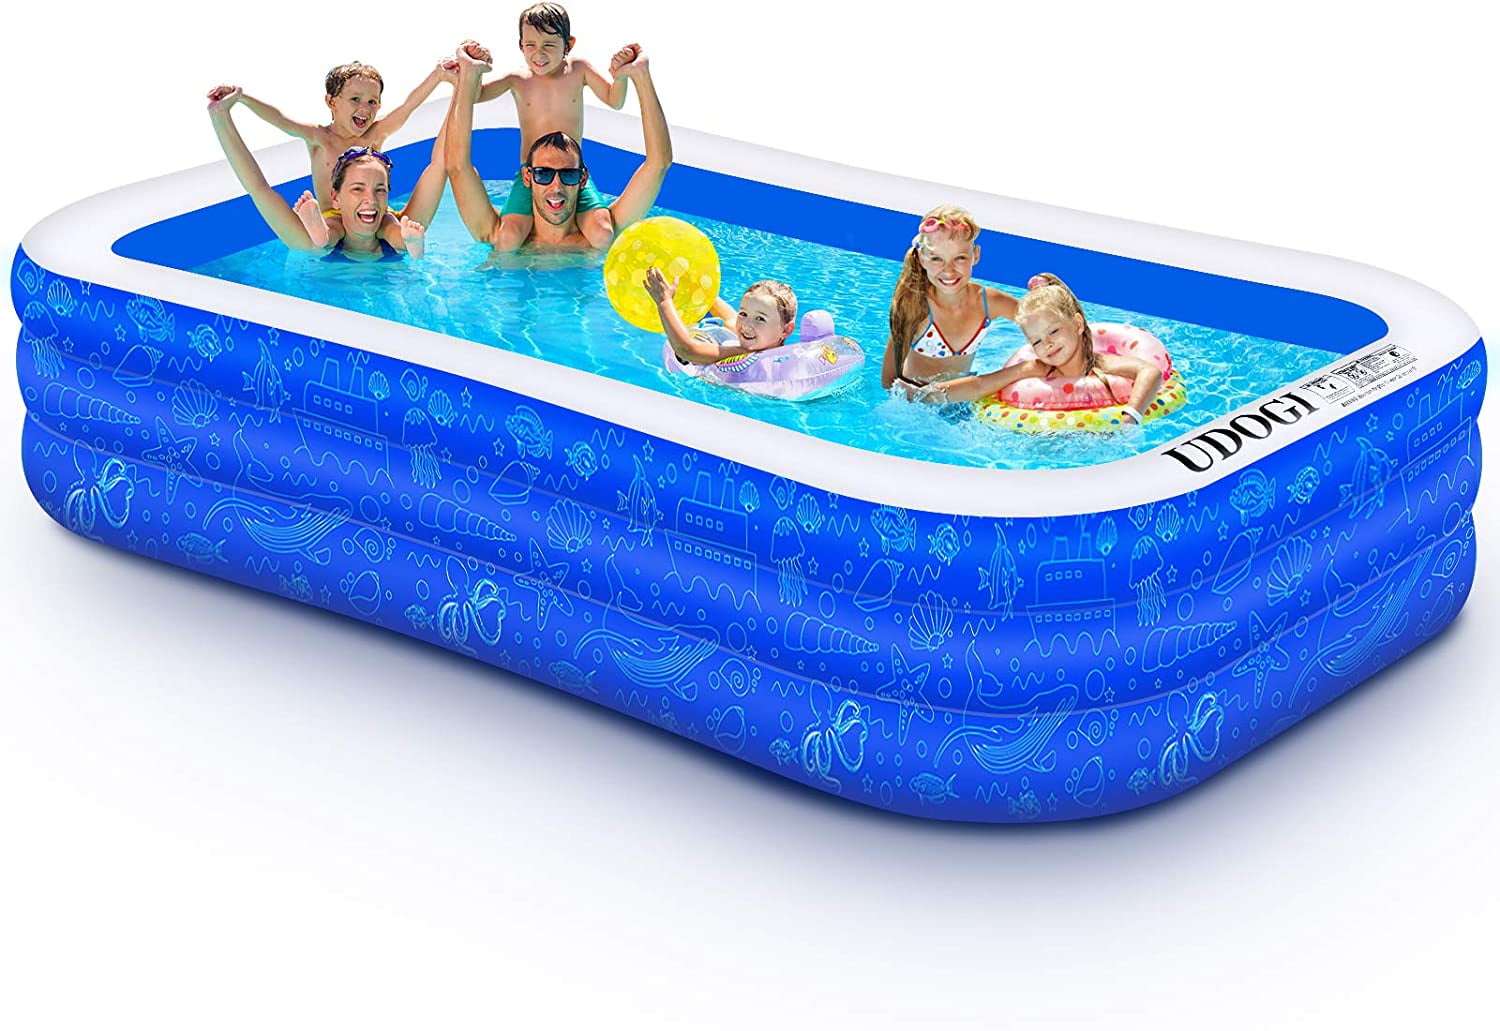 Blow up Pool for Garden/Backyard/Indoor/Outdoor Water Party 118x 72x 22 Full-Sized Family Inflatable Swimming Lounge Pool for Ages 3+ Inflatable Swimming Pool Adults Teens 